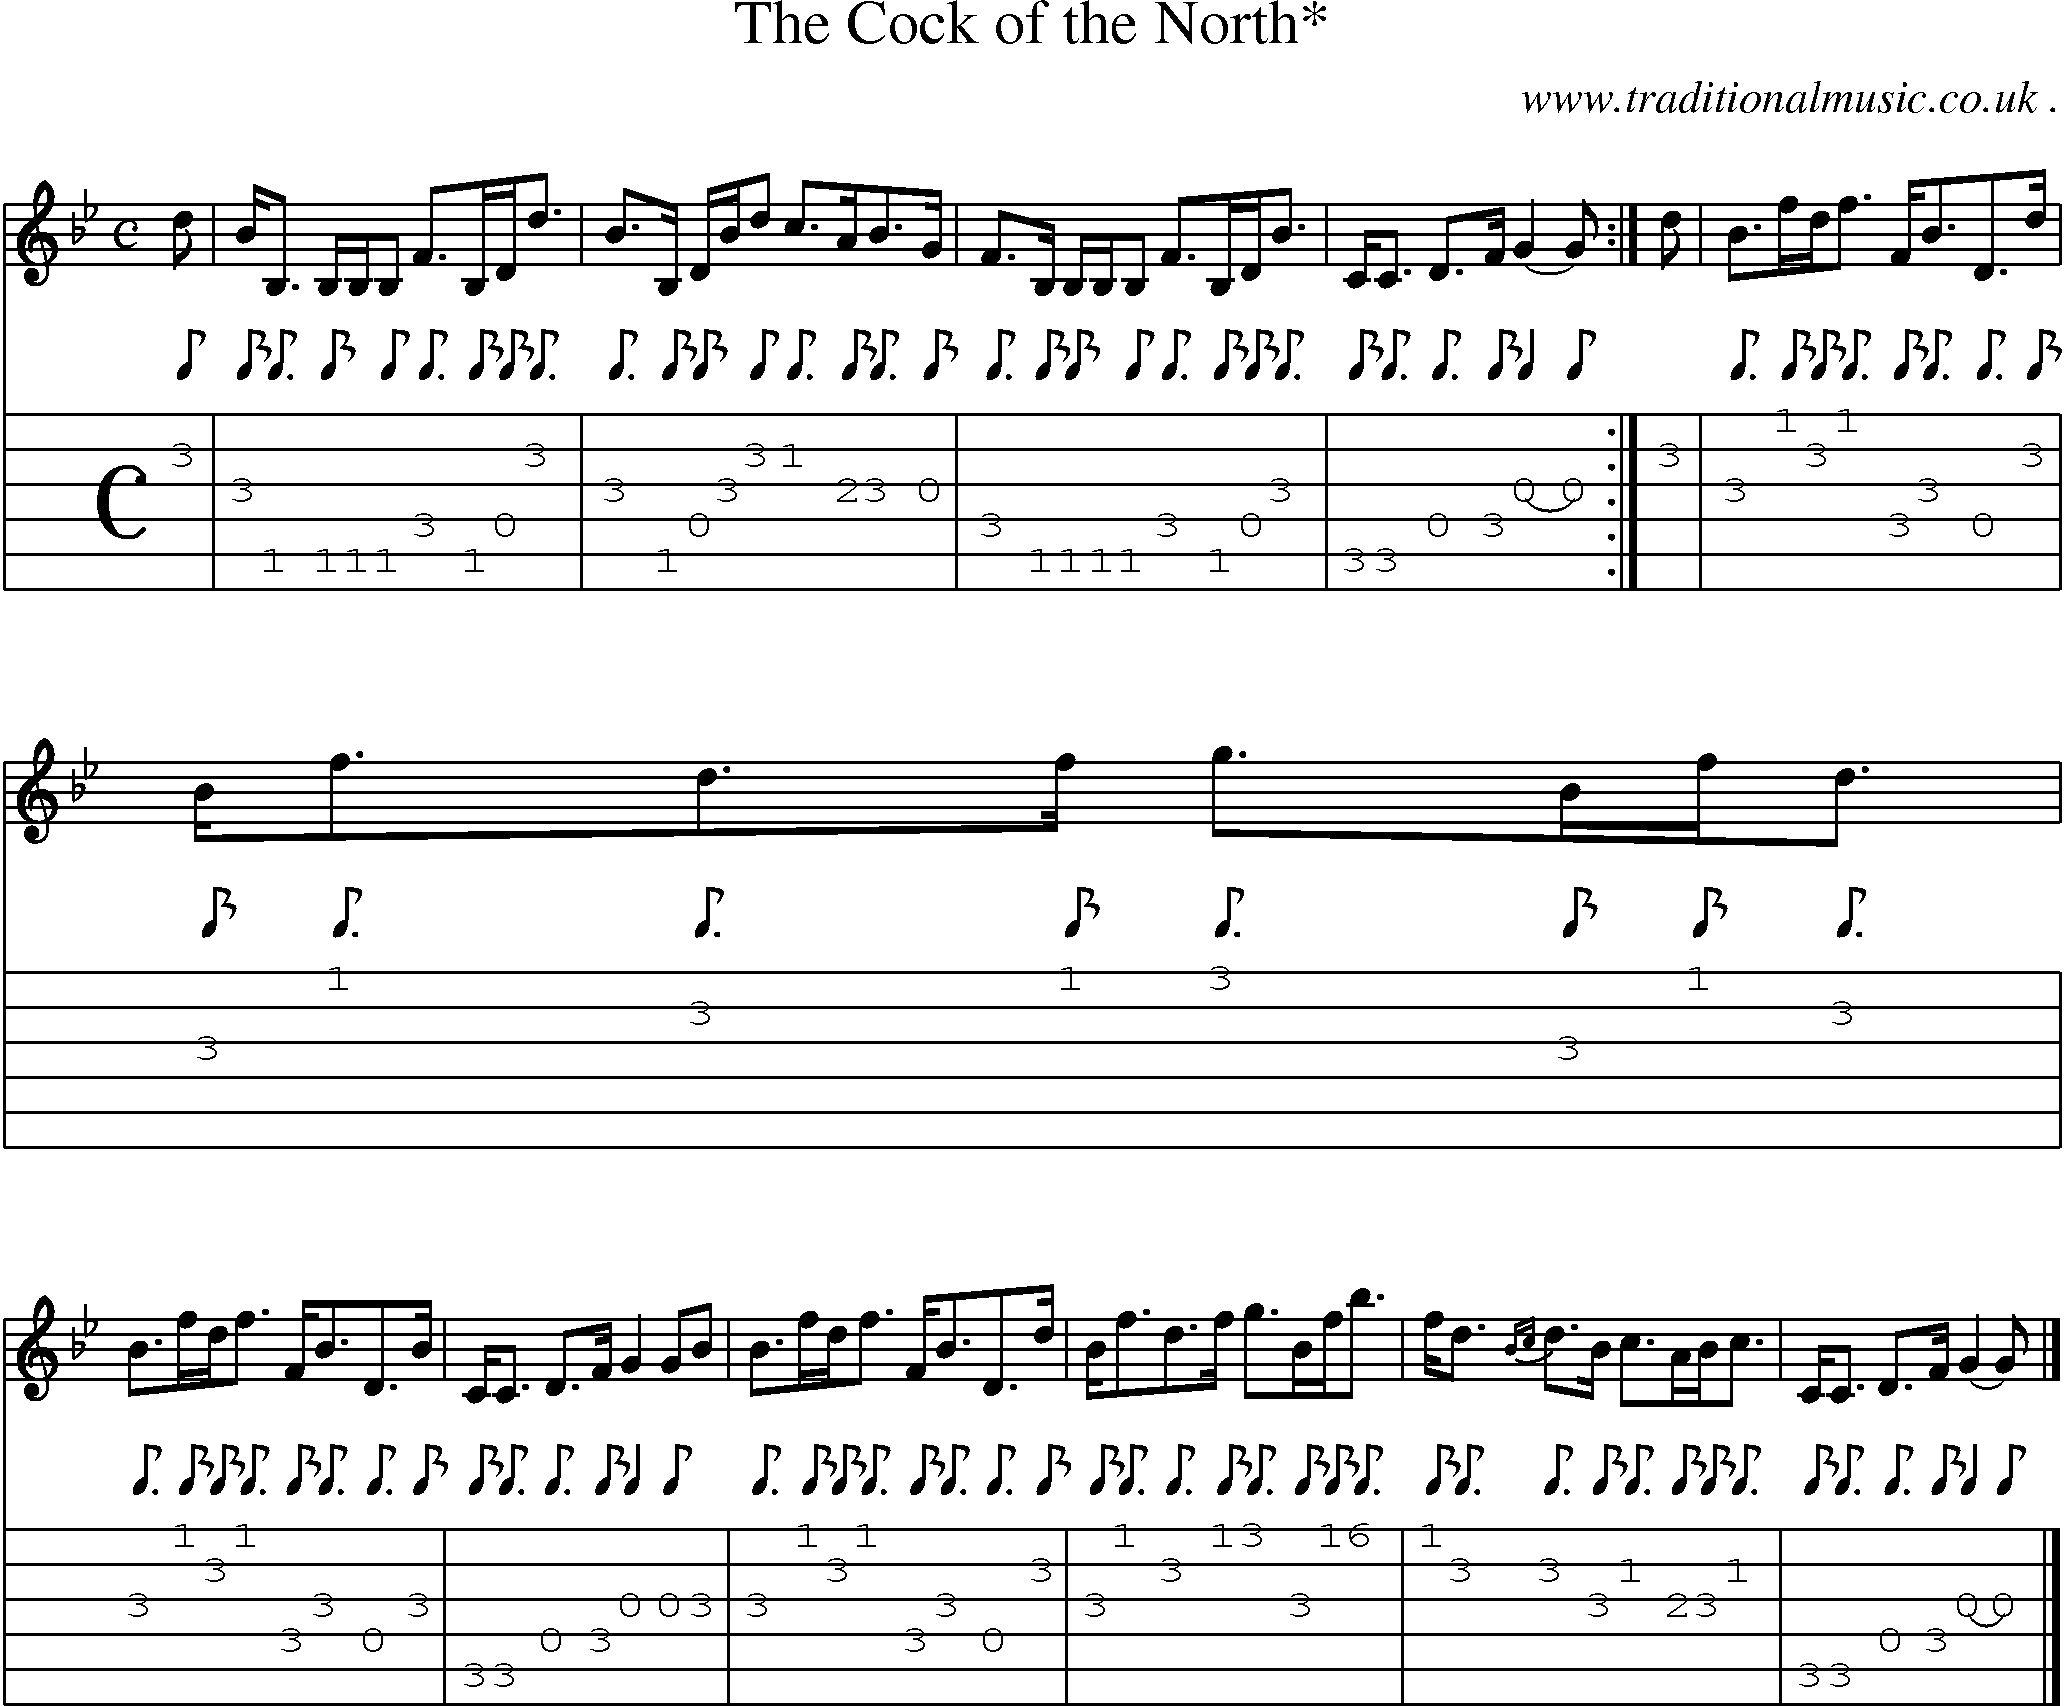 Sheet-music  score, Chords and Guitar Tabs for The Cock Of The North